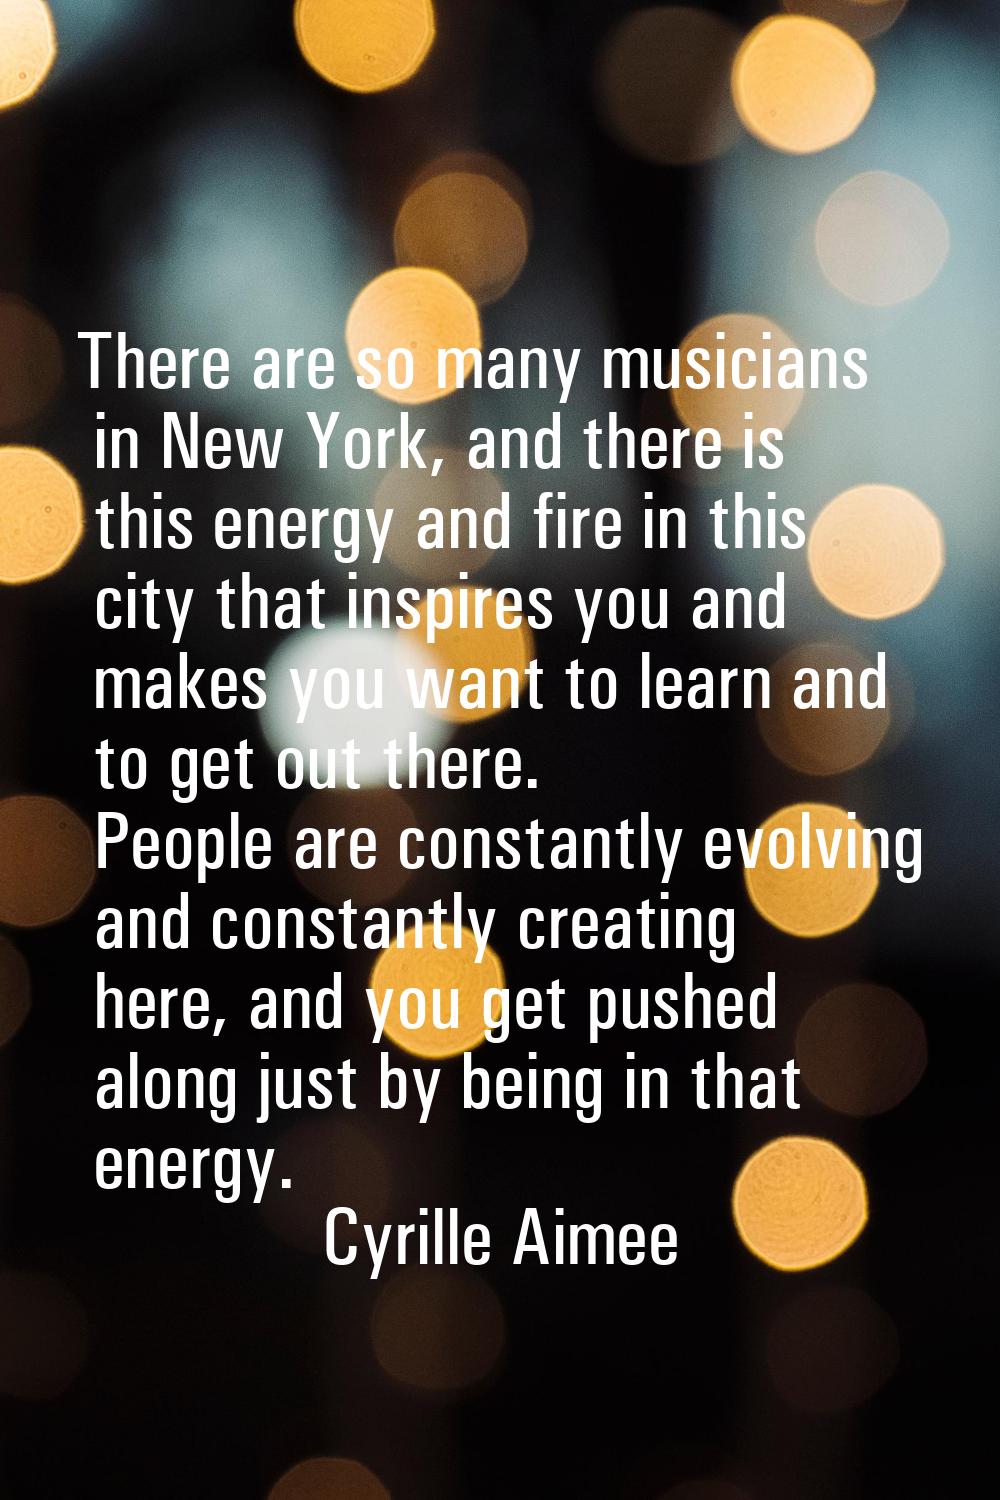 There are so many musicians in New York, and there is this energy and fire in this city that inspir